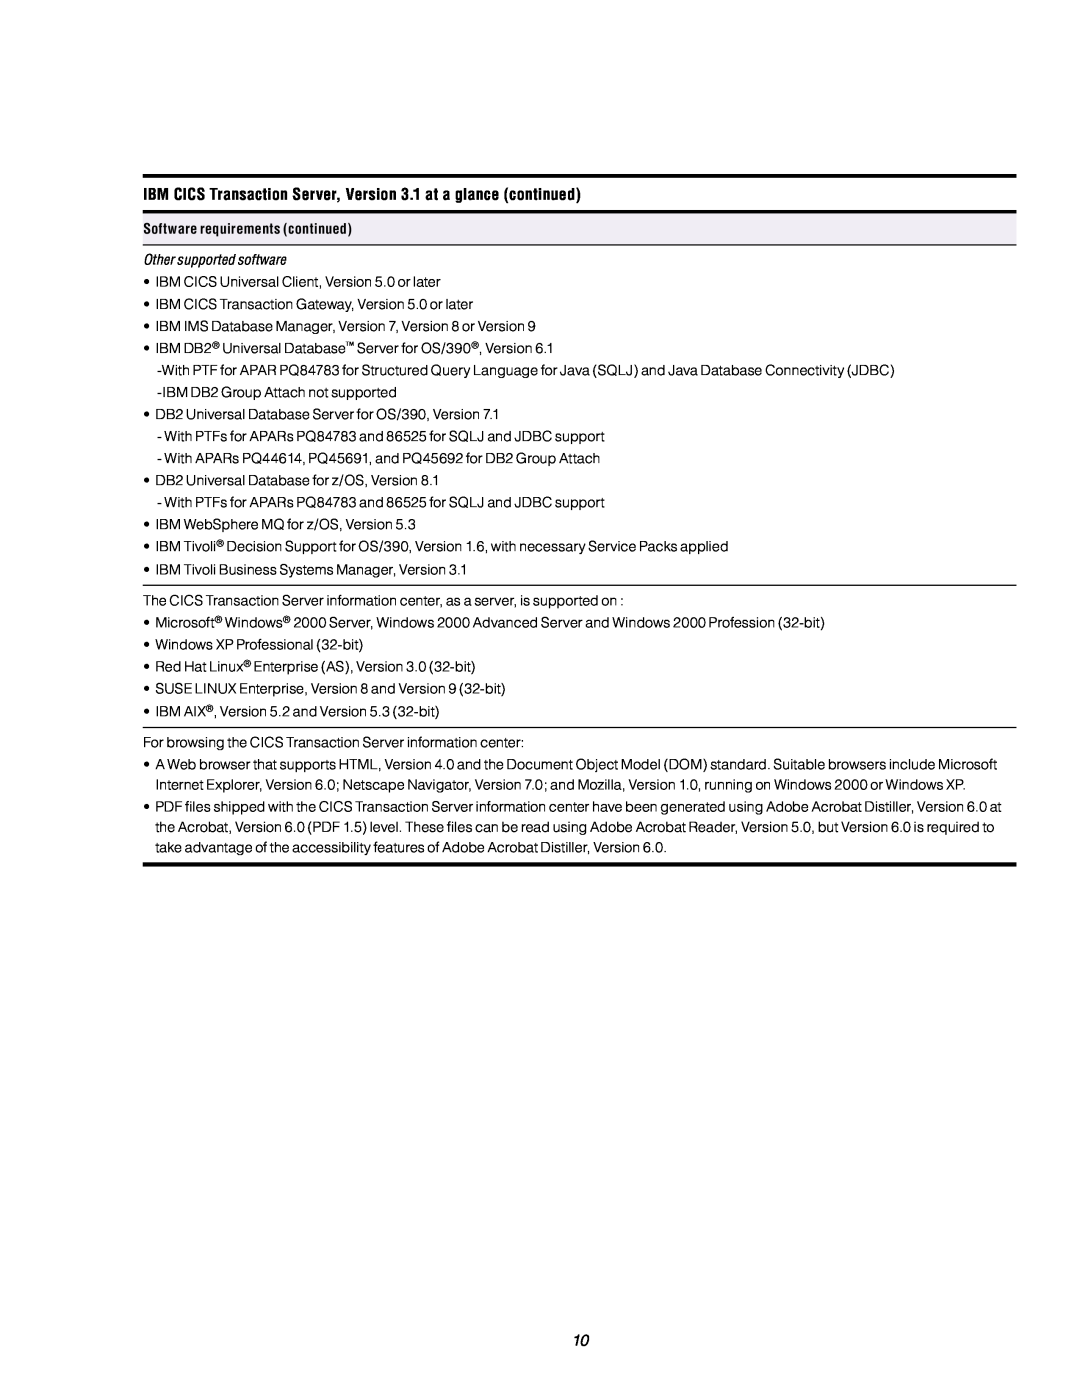 IBM manual IBM CICS Transaction Server, Version 3.1 at a glance continued, Software requirements continued 